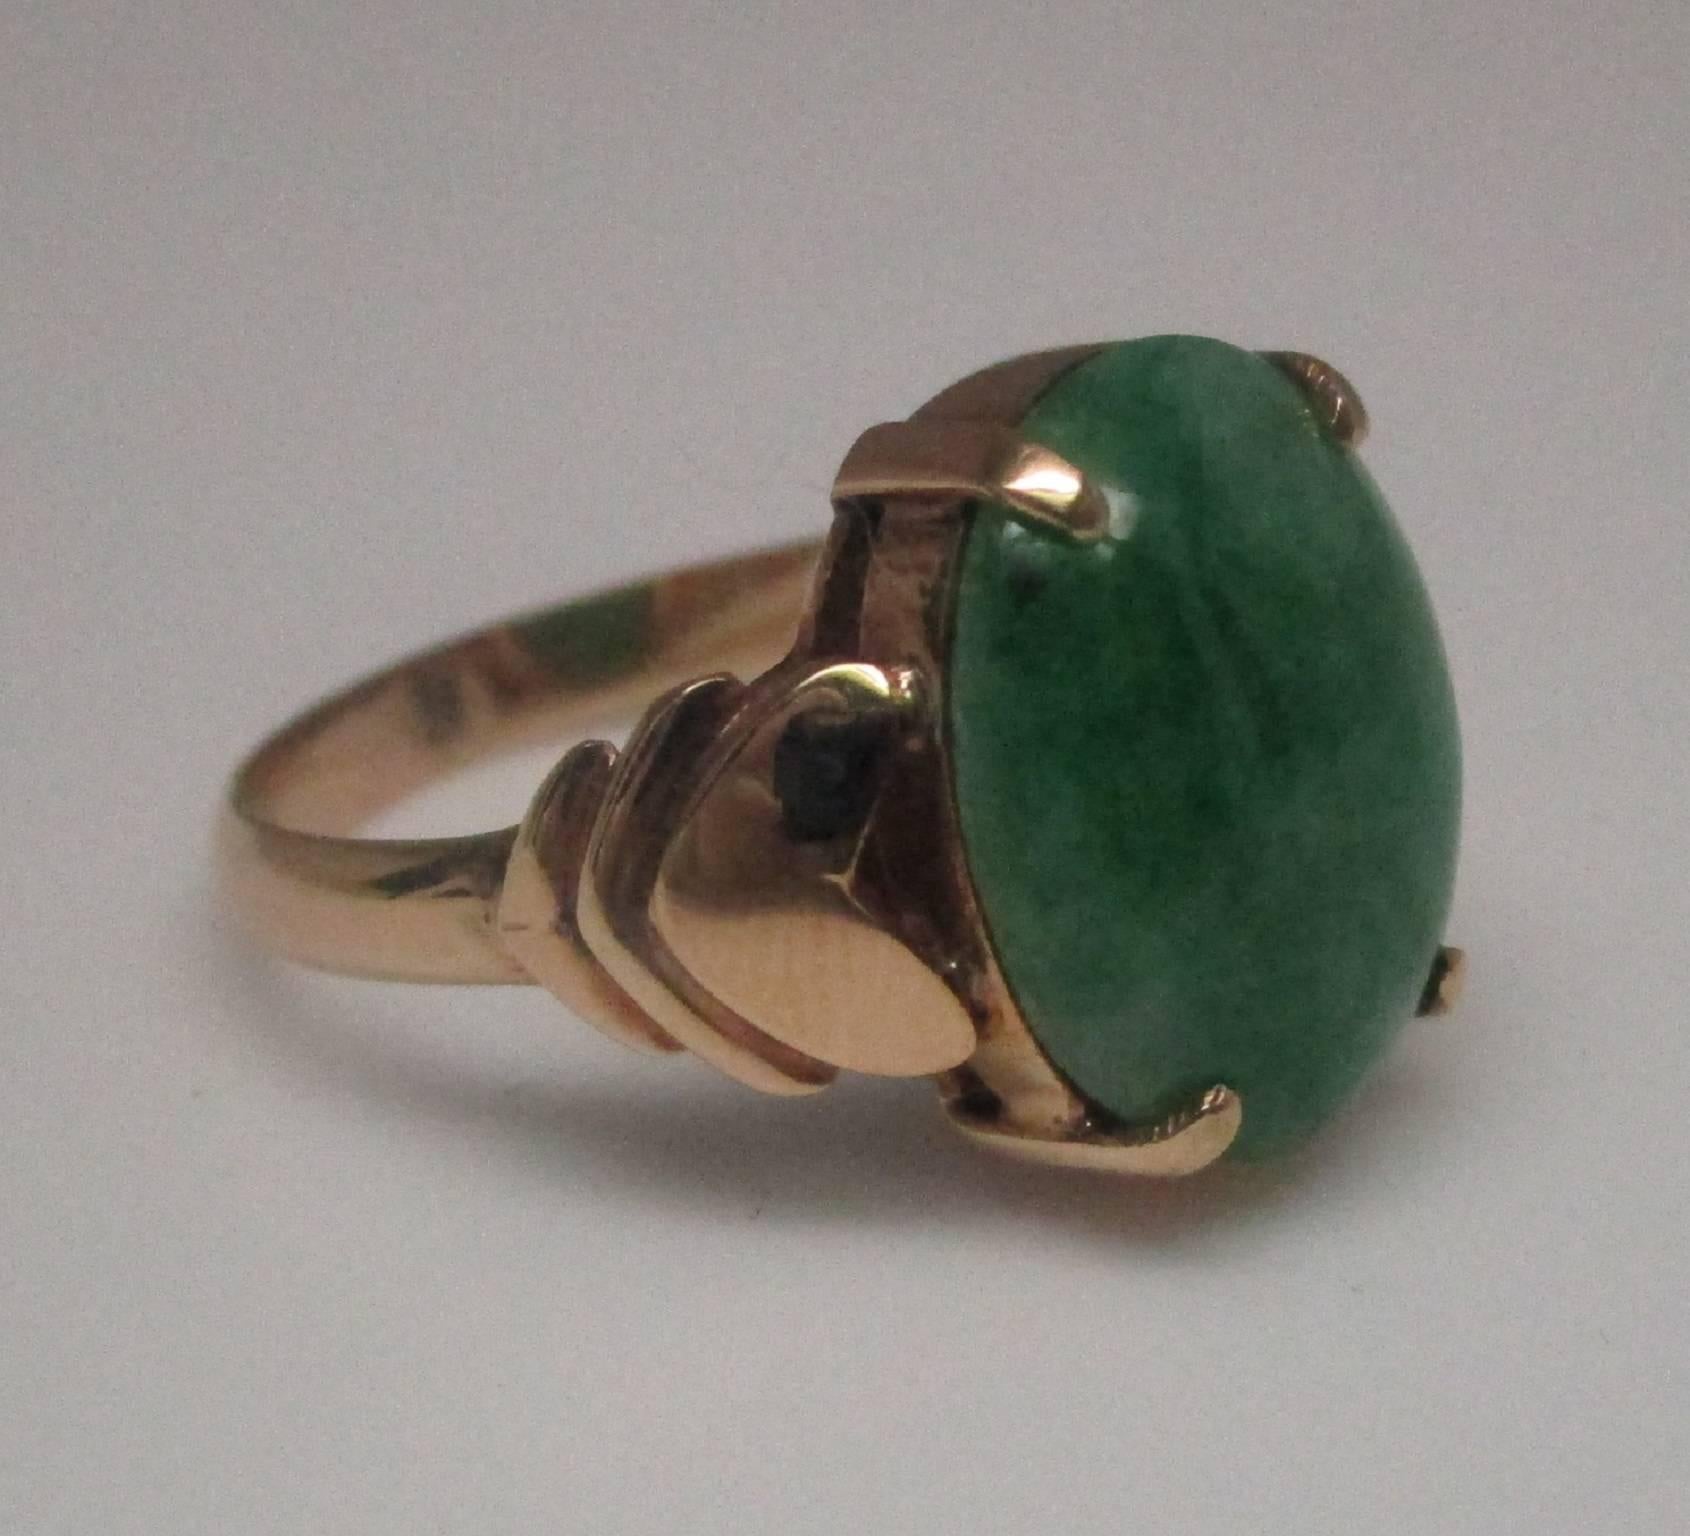 Jade always makes a statement for the most discerning. The beautiful polish allows this gem to truly glow and the 18 karat yellow gold makes it very wearable, stepping smoothly from the stone to the shoulders. It lays close to the hand, making it